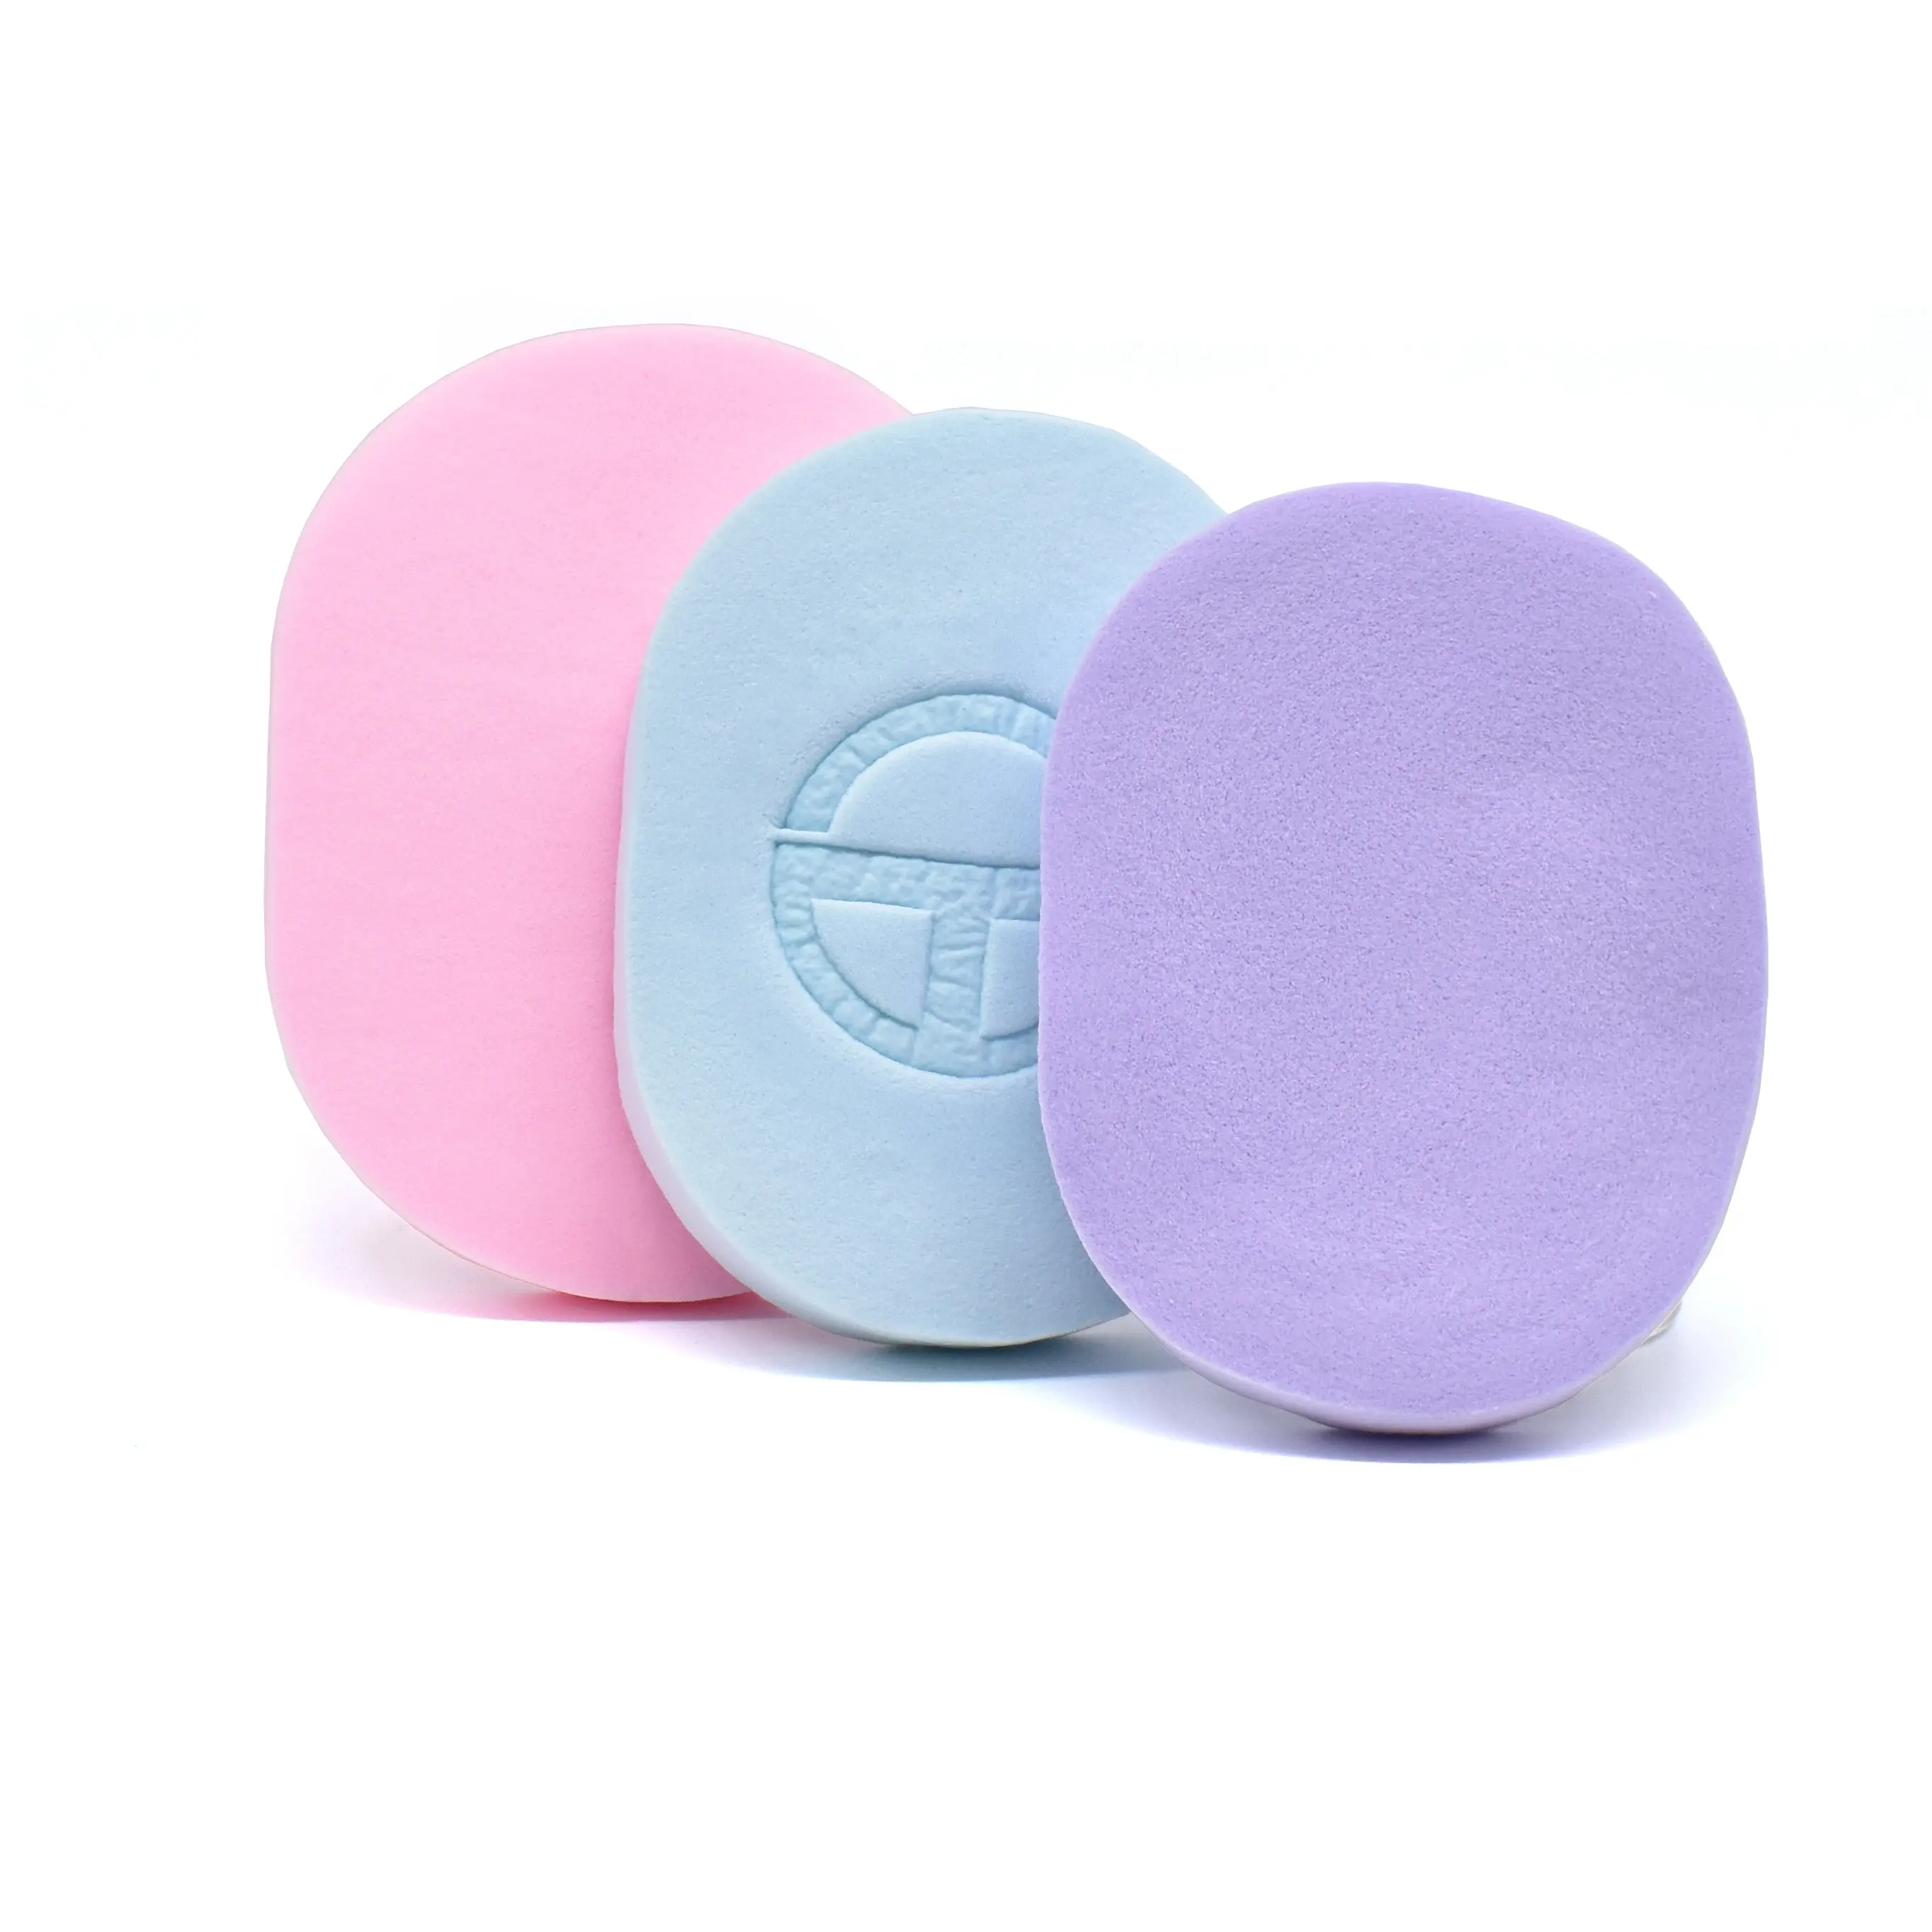 Reusable oval round makeup removal cleansing pad powder puff natural face wash sponge body puff for removing makeup